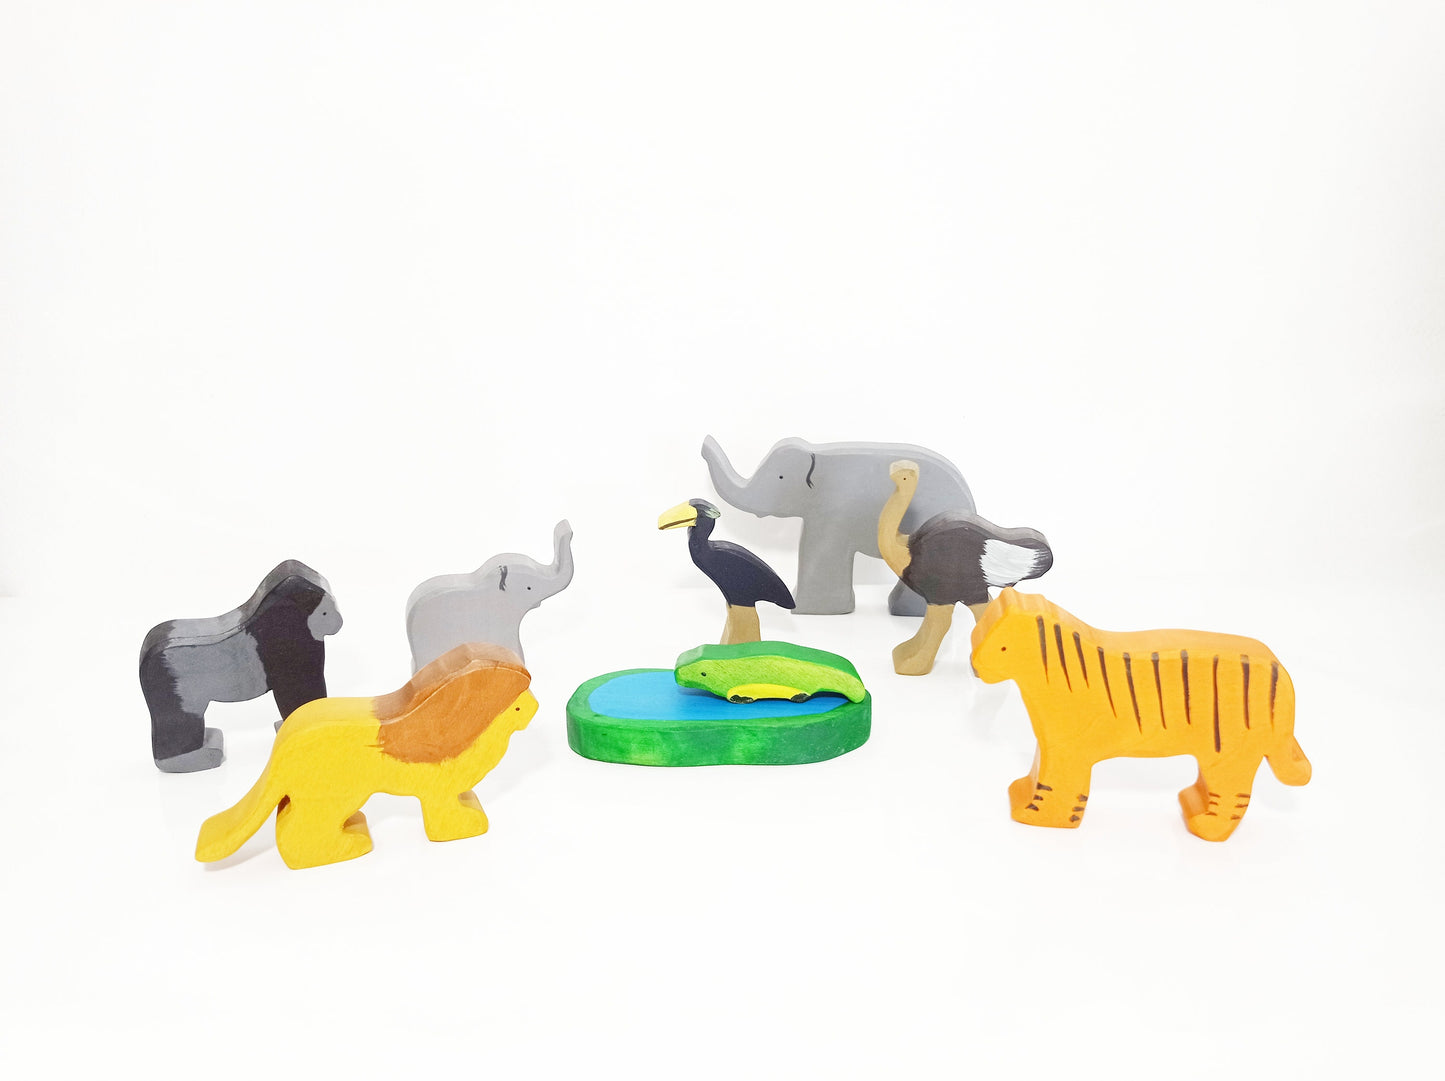 Exotic safari animals with lake wooden toy play set, wooden waldorf inspired animals toy set, gift for kids, invitation to play, wooden toys